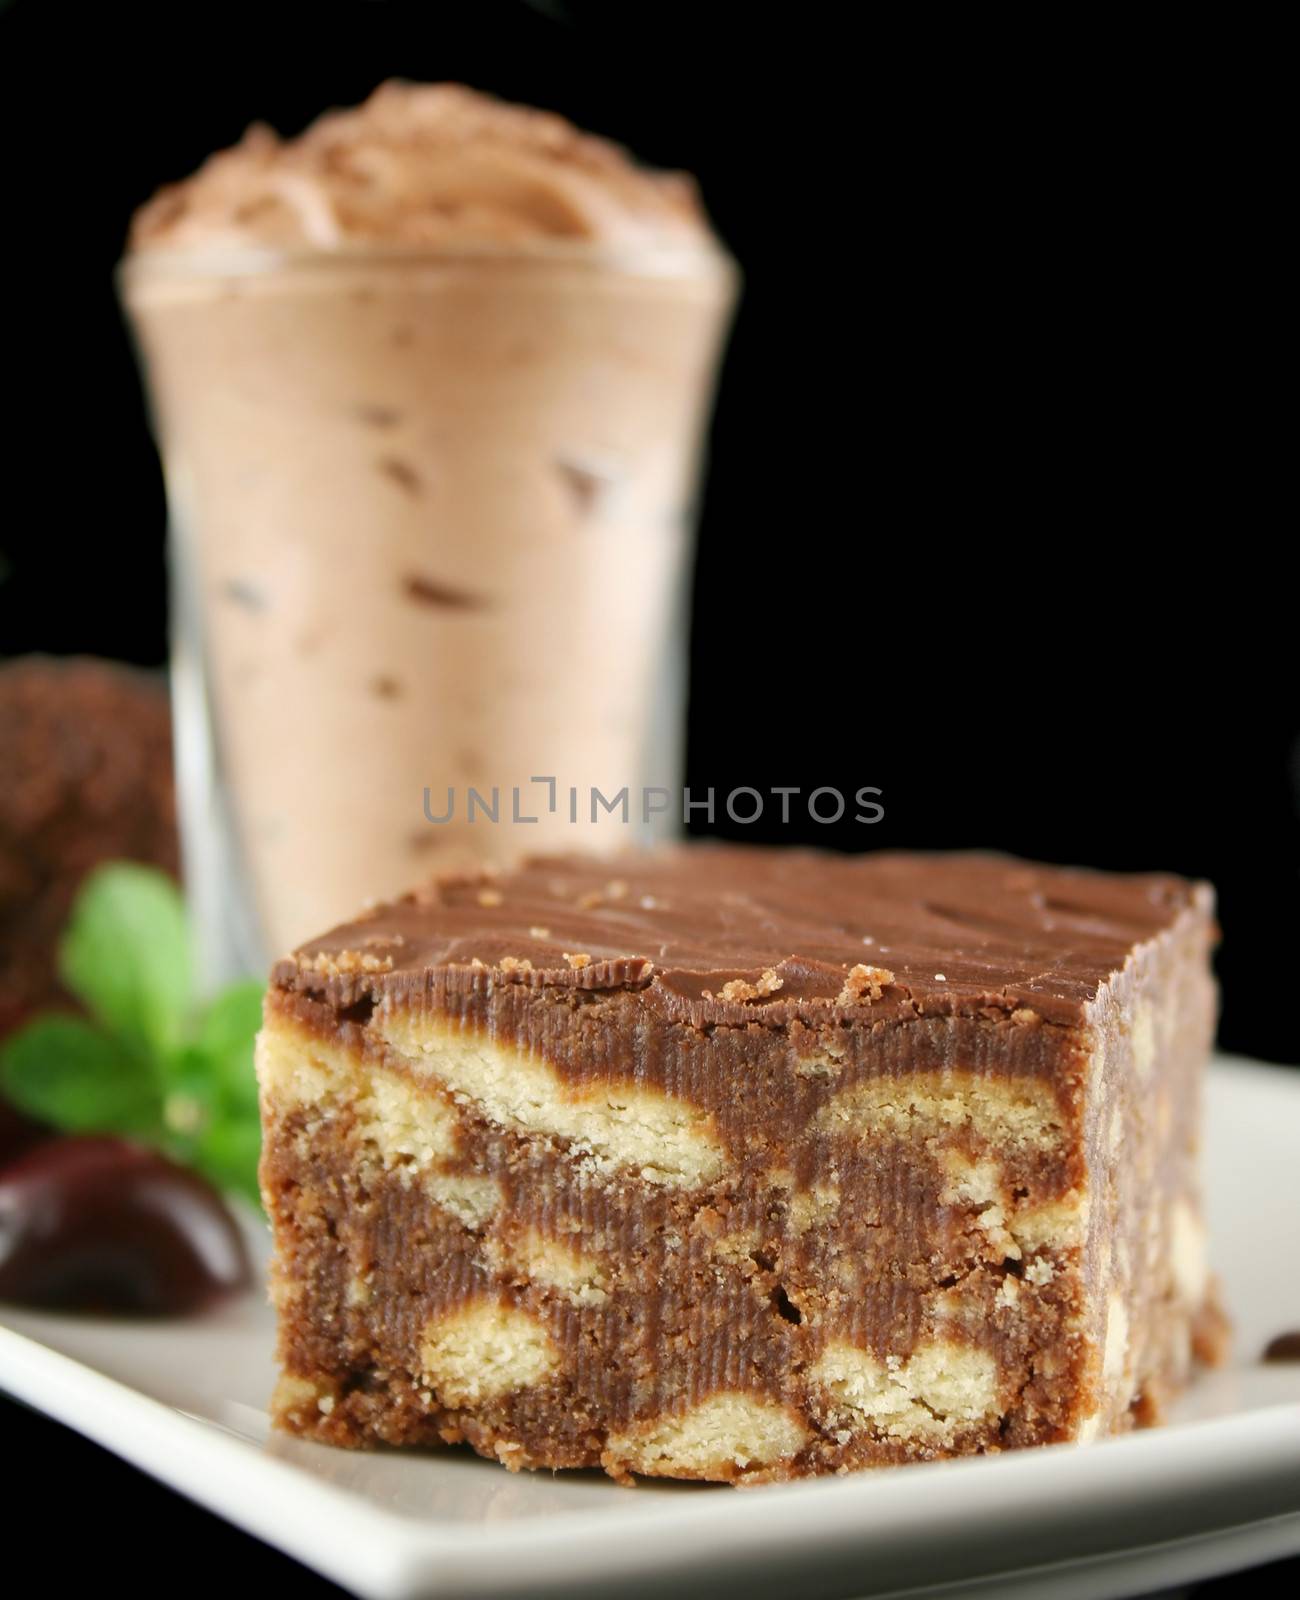 Chocolate slice with chocolate mousse in the background.